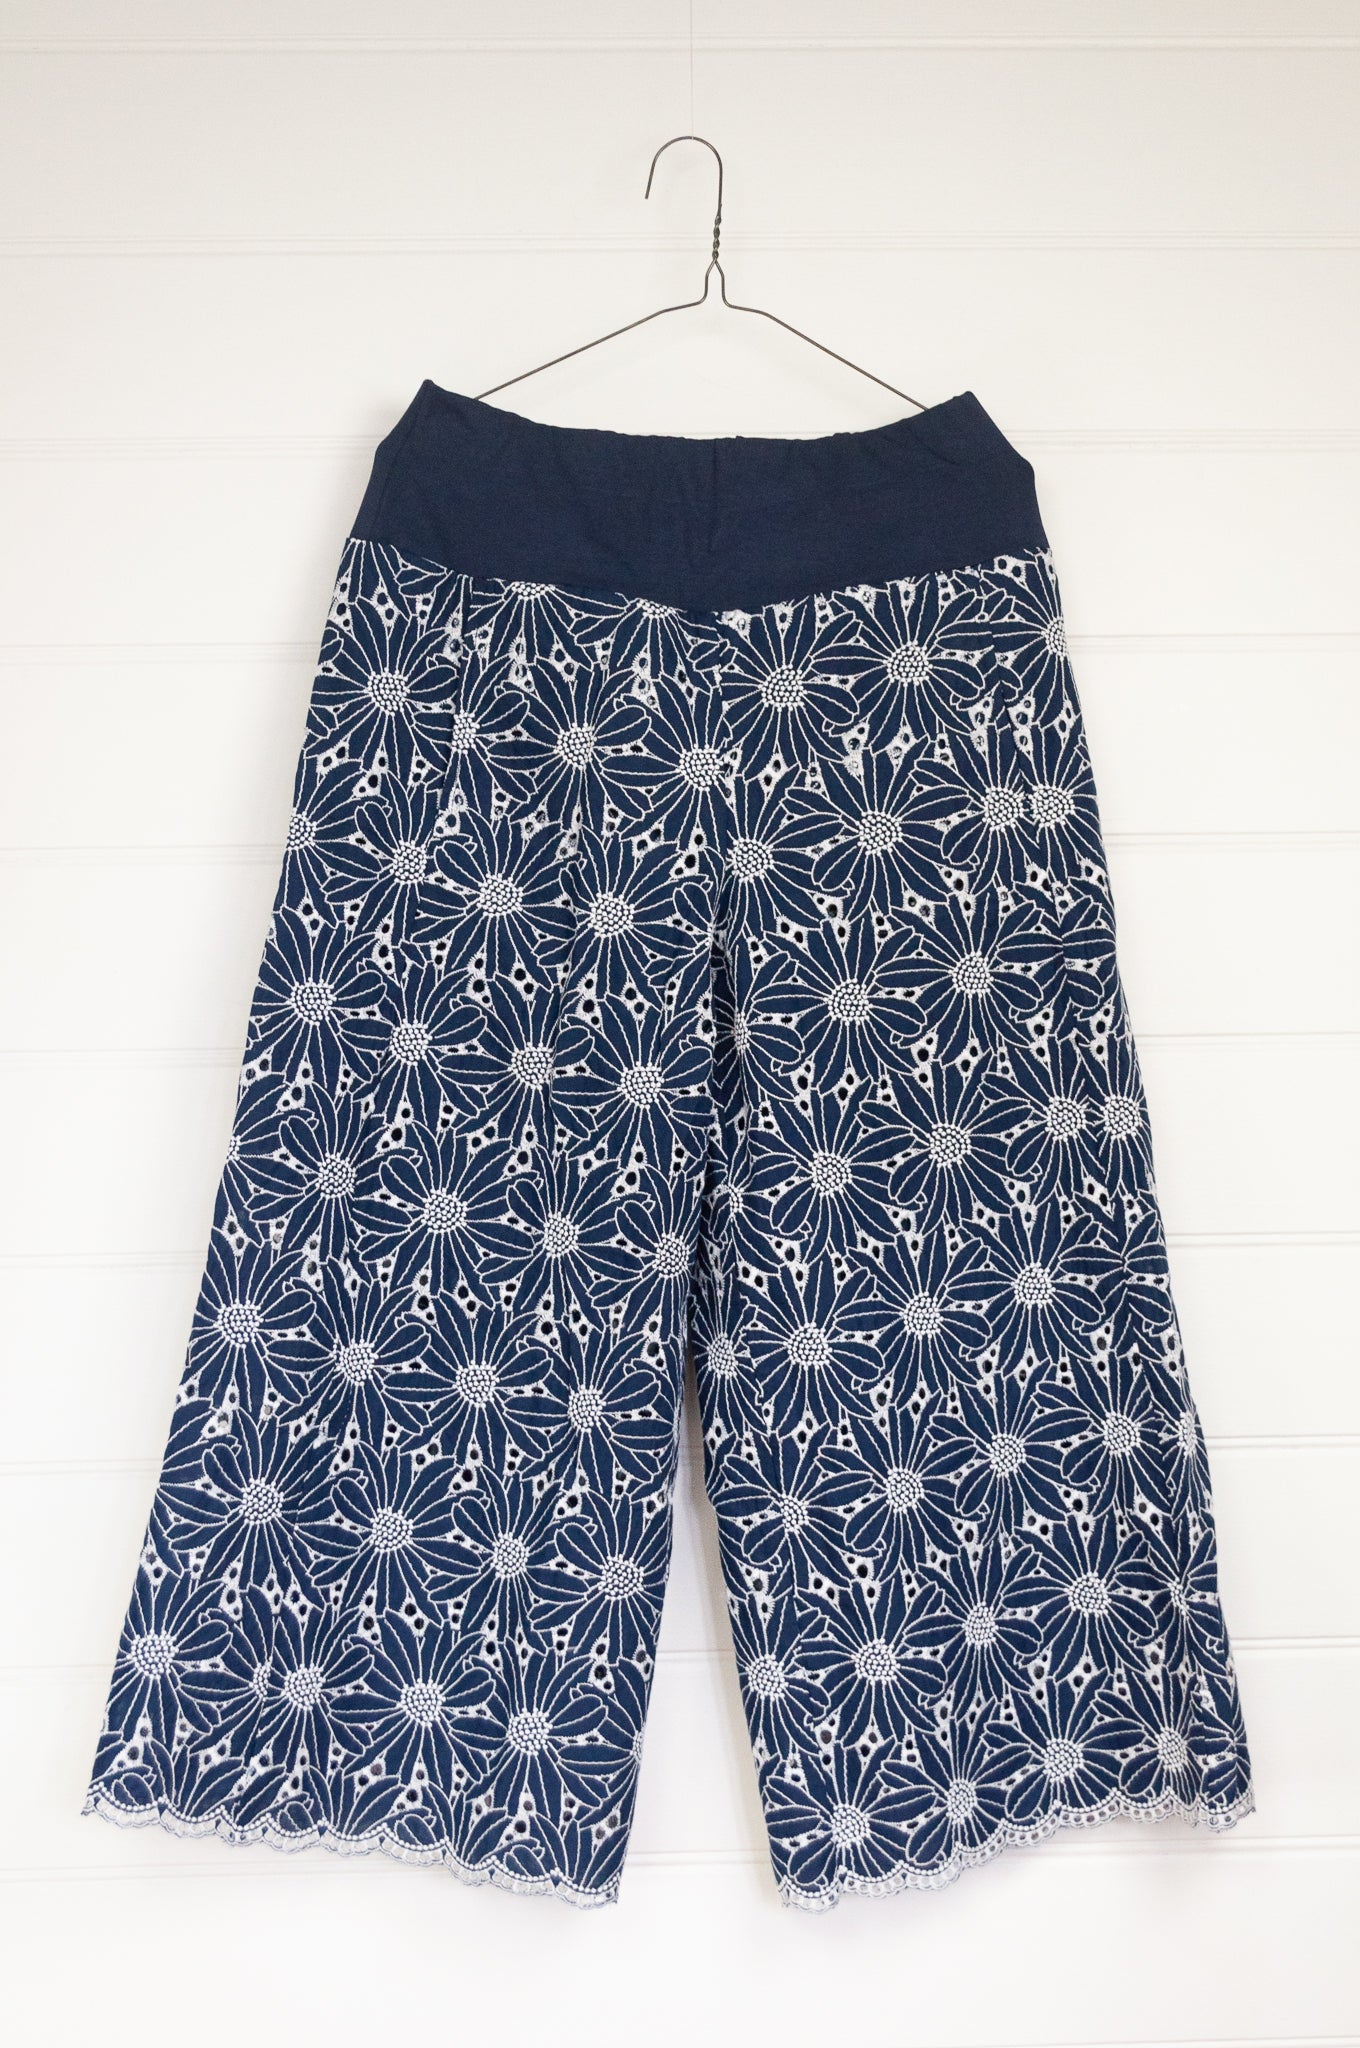 Valia made in Australia broderie wide leg Deauville pants in navy blue and white.